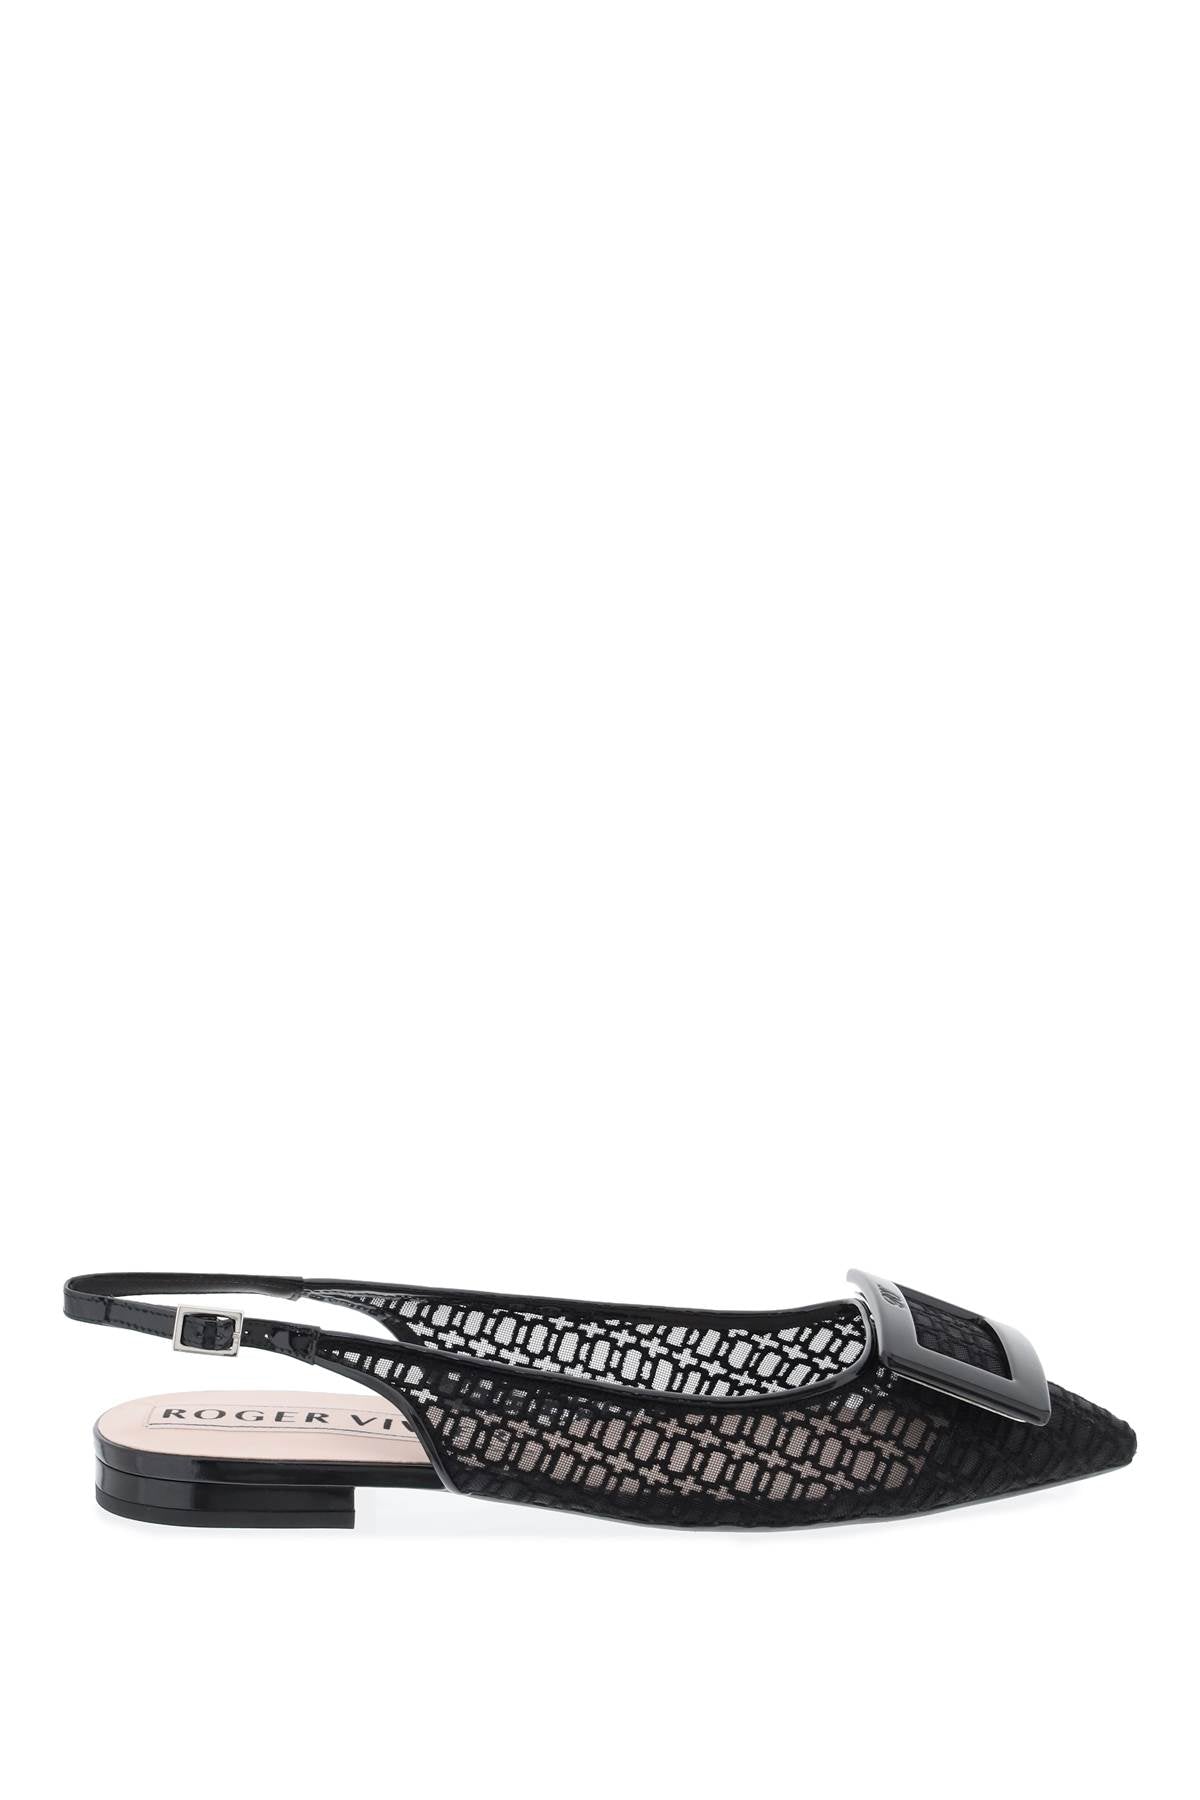 ROGER VIVIER Sophisticated and Chic Gommettine Net Slingback Flats for Women - FW23 Collection